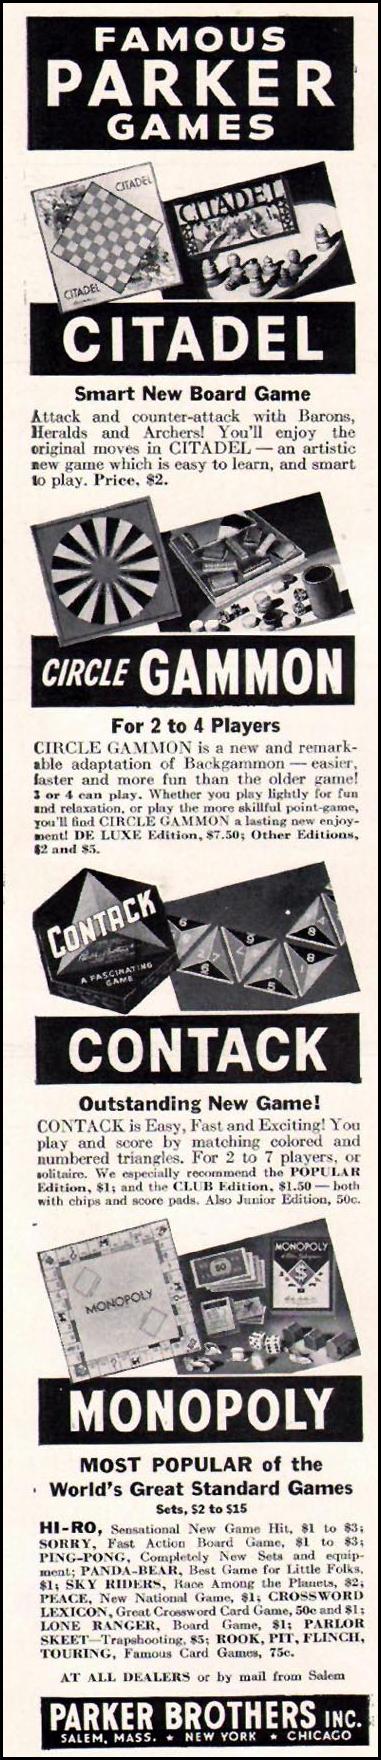 PARKER BROTHERS BOARD GAMES
LIFE
12/16/1940
p. 102